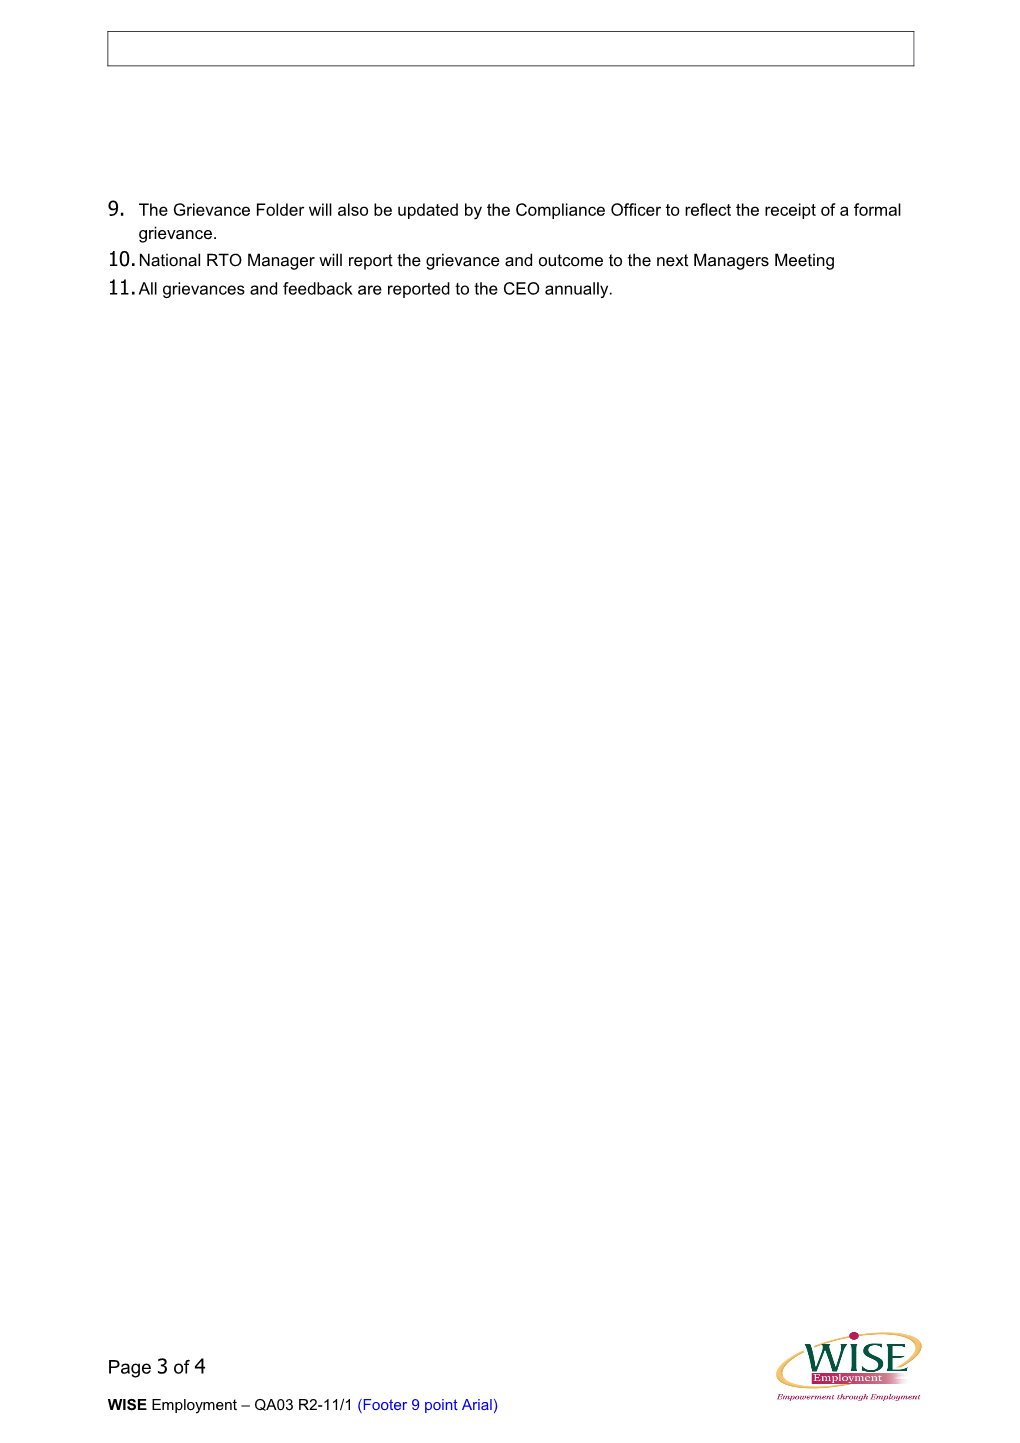 Policy and Procedure Document Template (QA03)